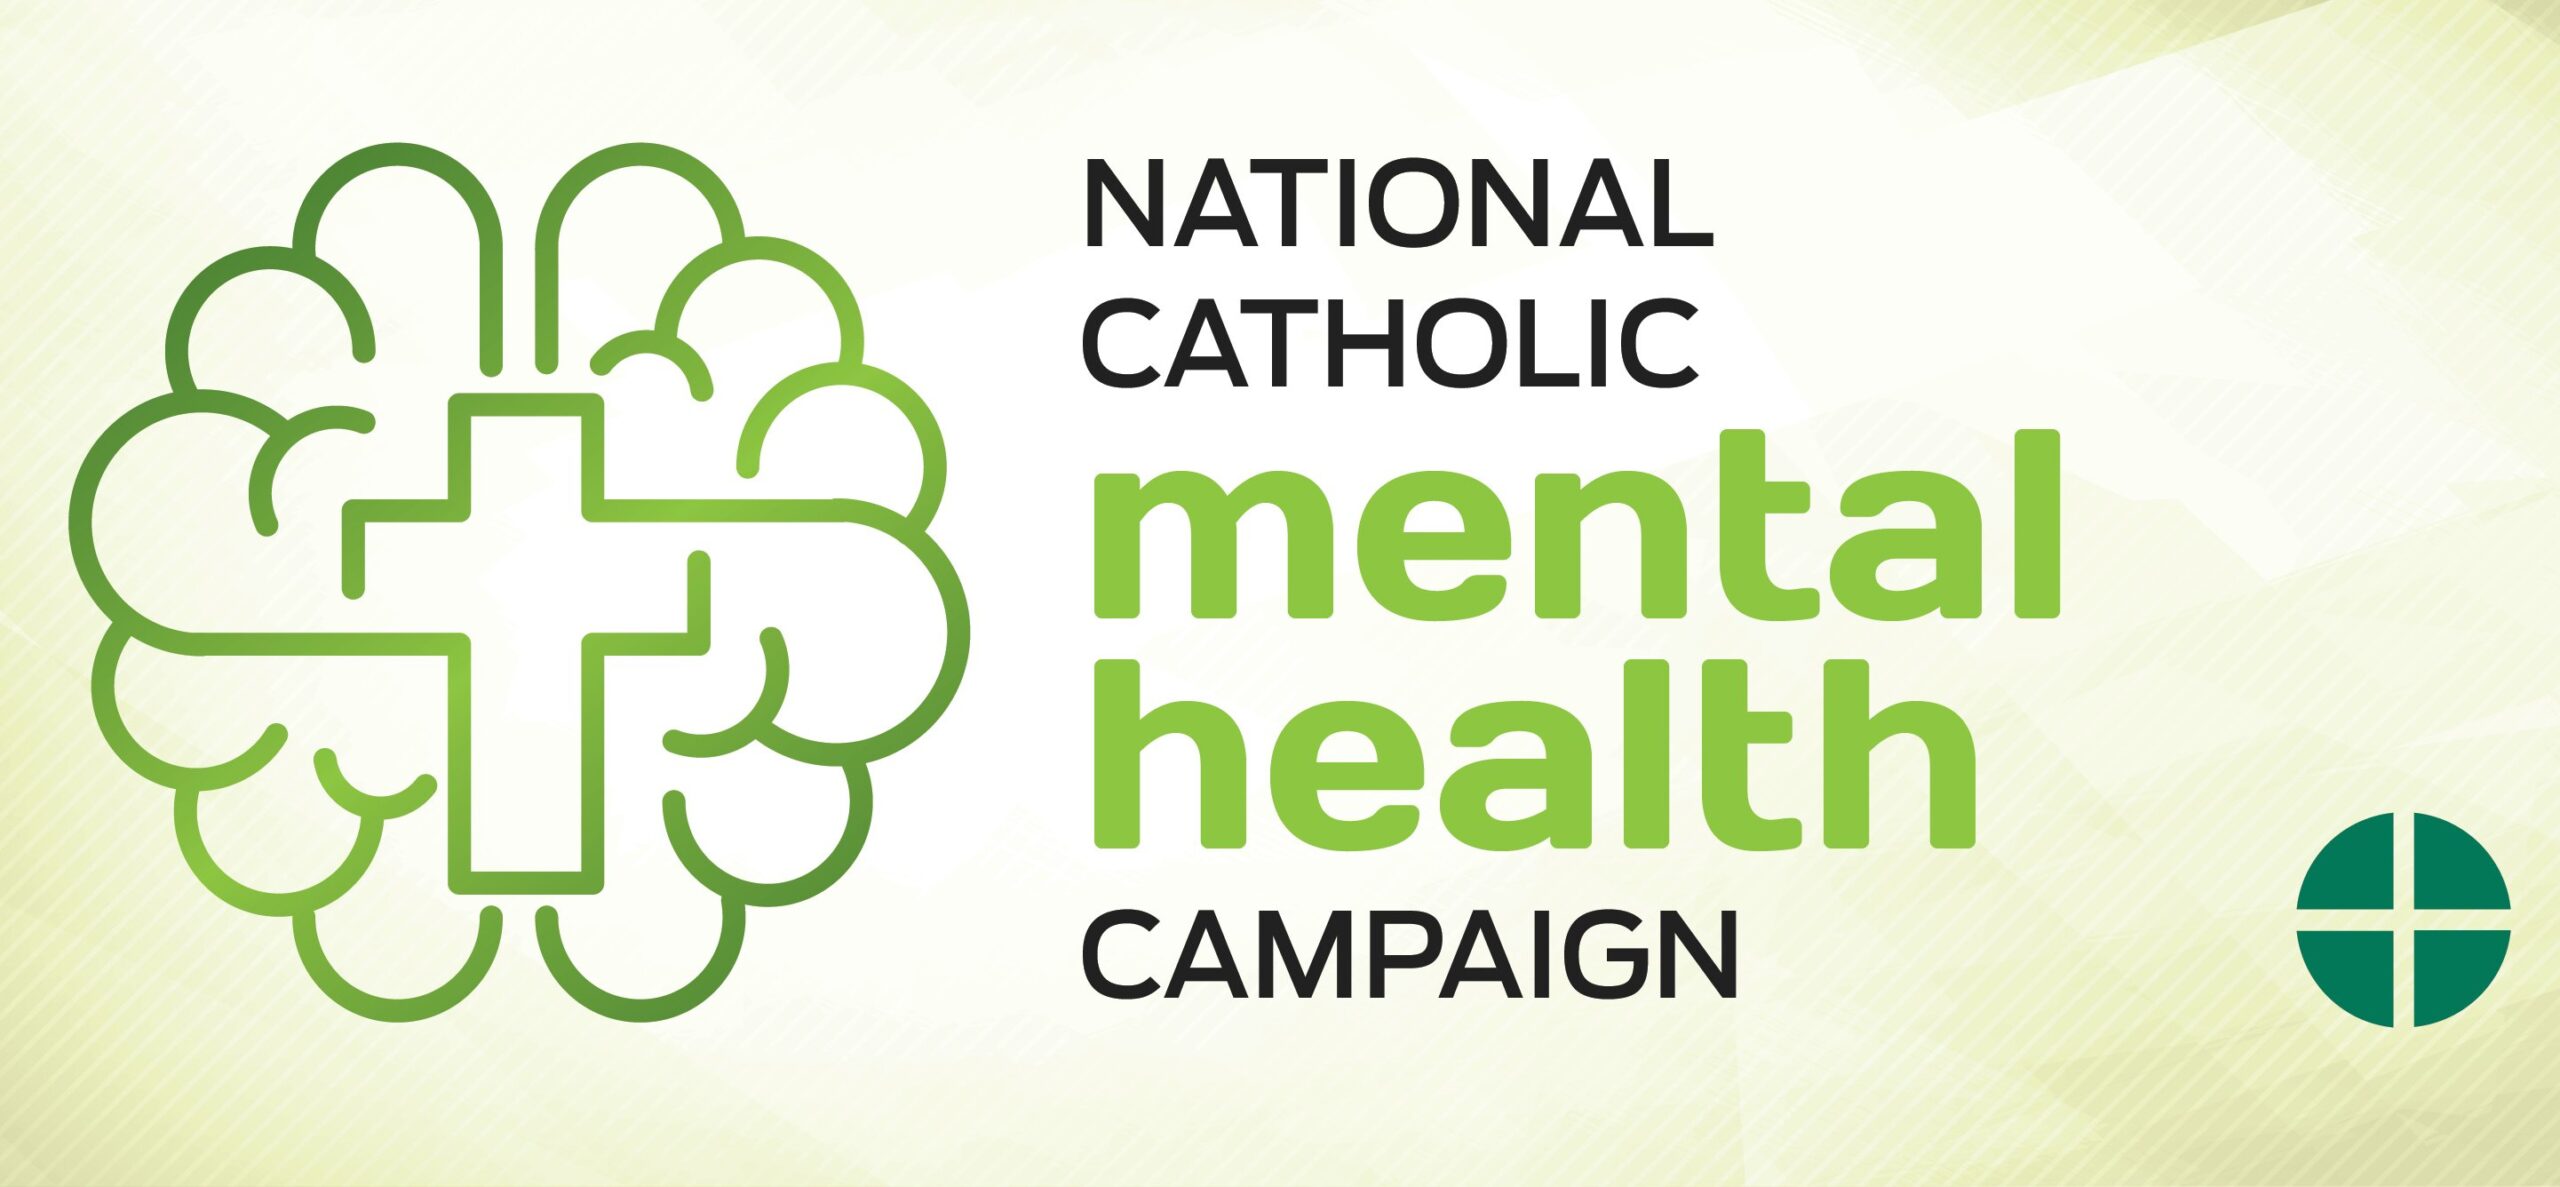 The U.S. Conference of Catholic Bishops launched a National Catholic Mental Health Campaign Oct. 10, 2023, to raise awareness of mental health issues and advocate that those who struggle with mental illness receive help. The campaign begins with an Oct. 10-18 novena to encourage participants to "pray, learn, act" to address mental health needs. (OSV News photo/courtesy USCCB)